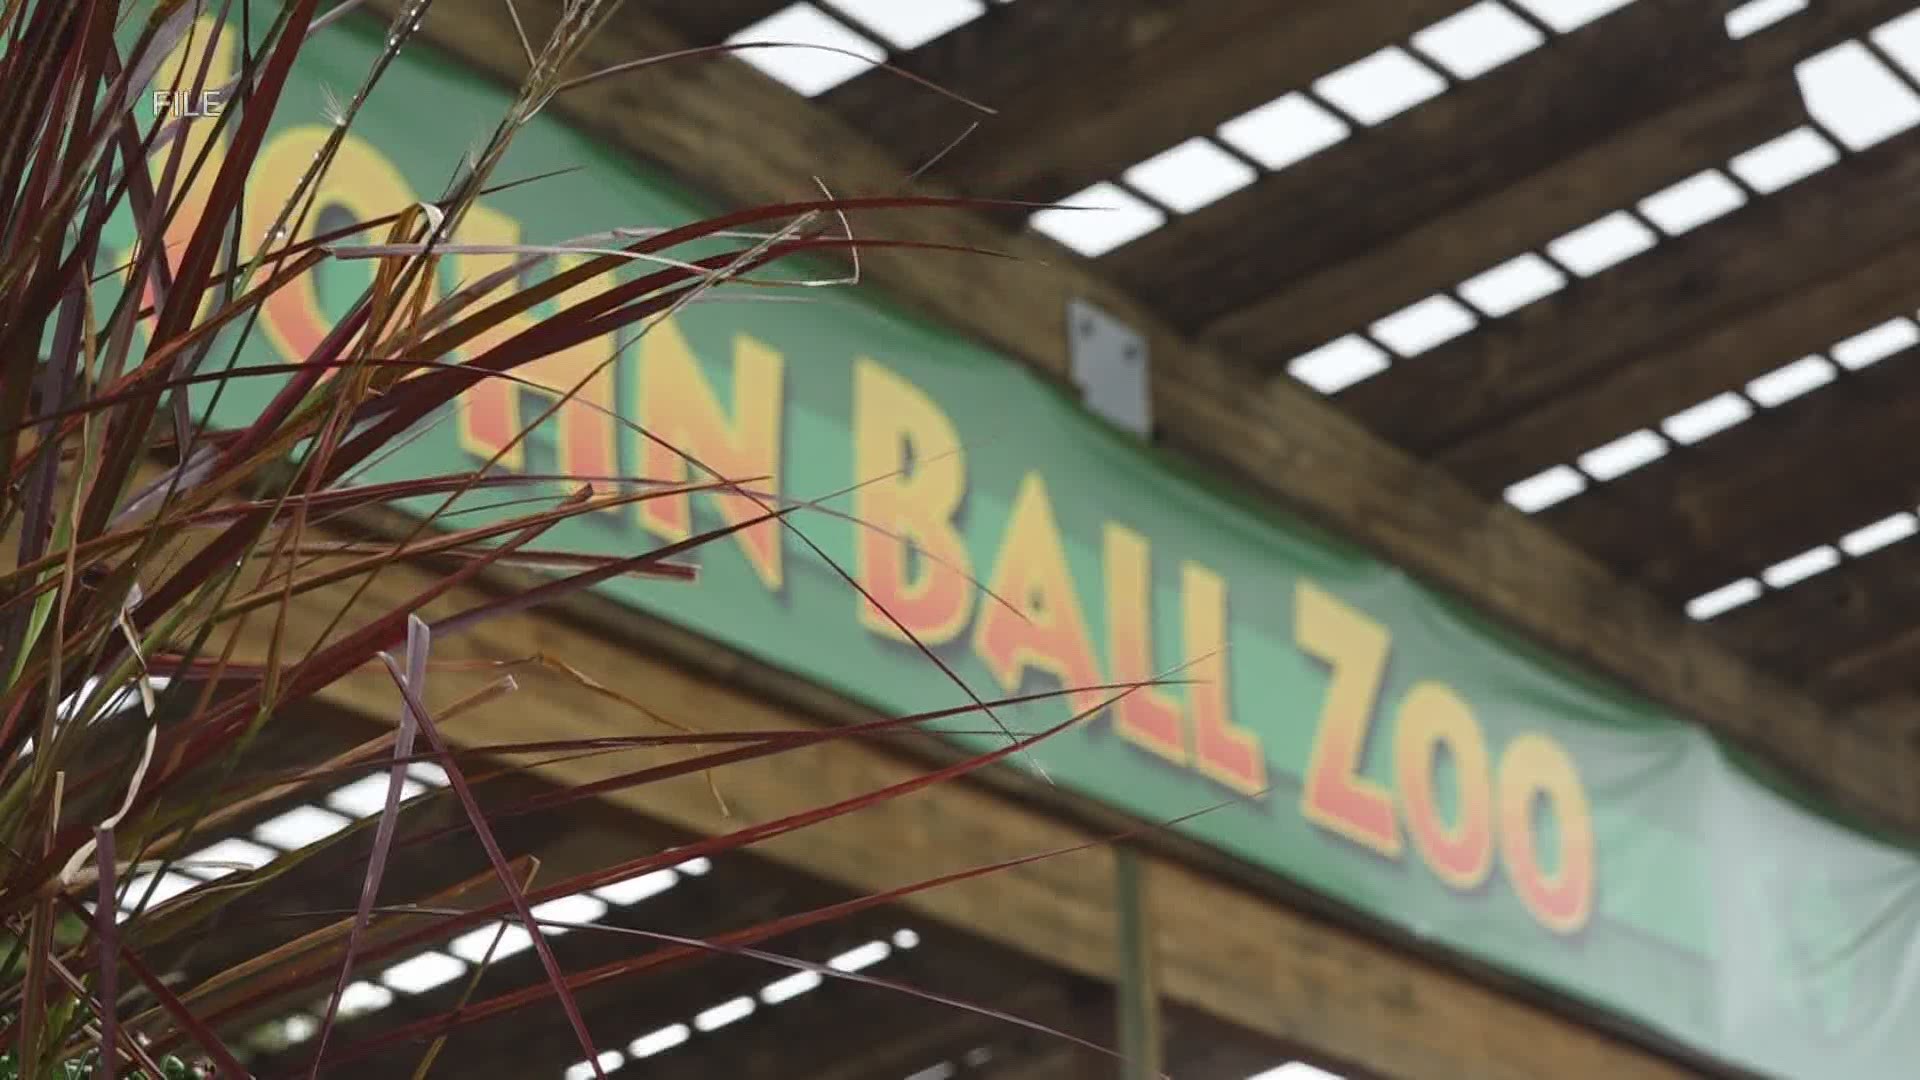 John Ball Zoo announced Tuesday that it hopes to open to members on May 29.